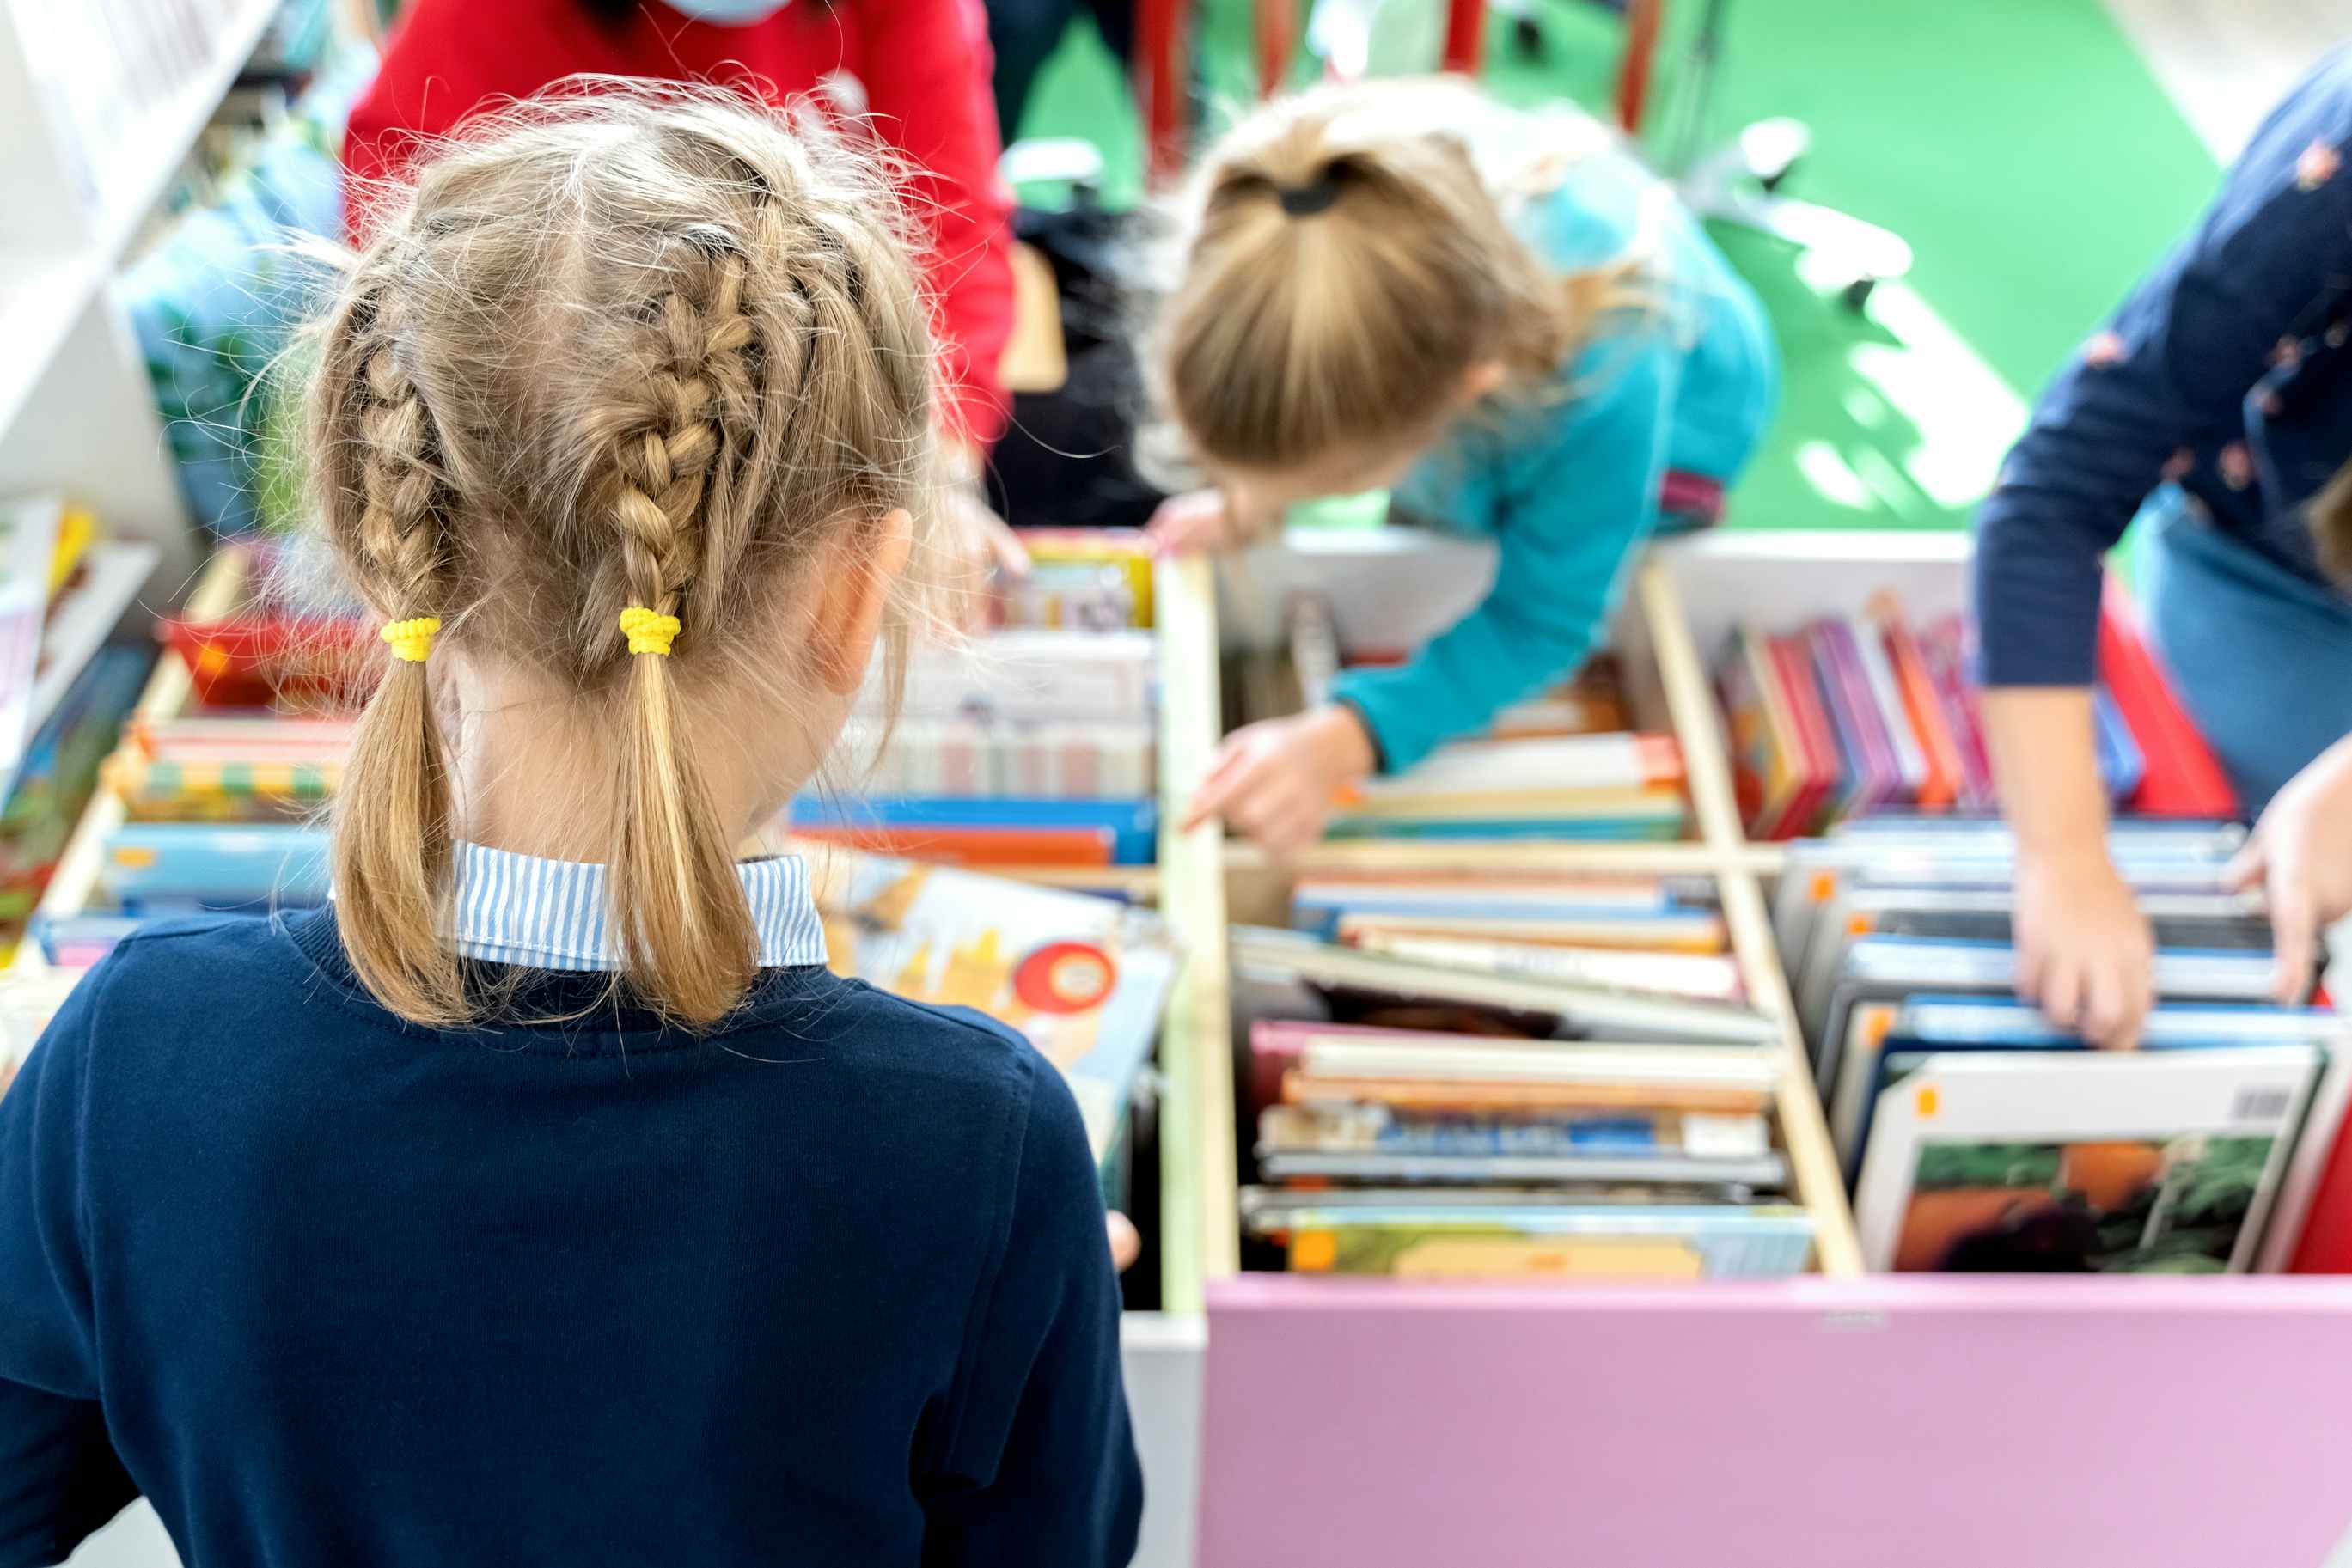 A child with French braids, facing away from the camera, looking at a bin full of books that other children are looking through.